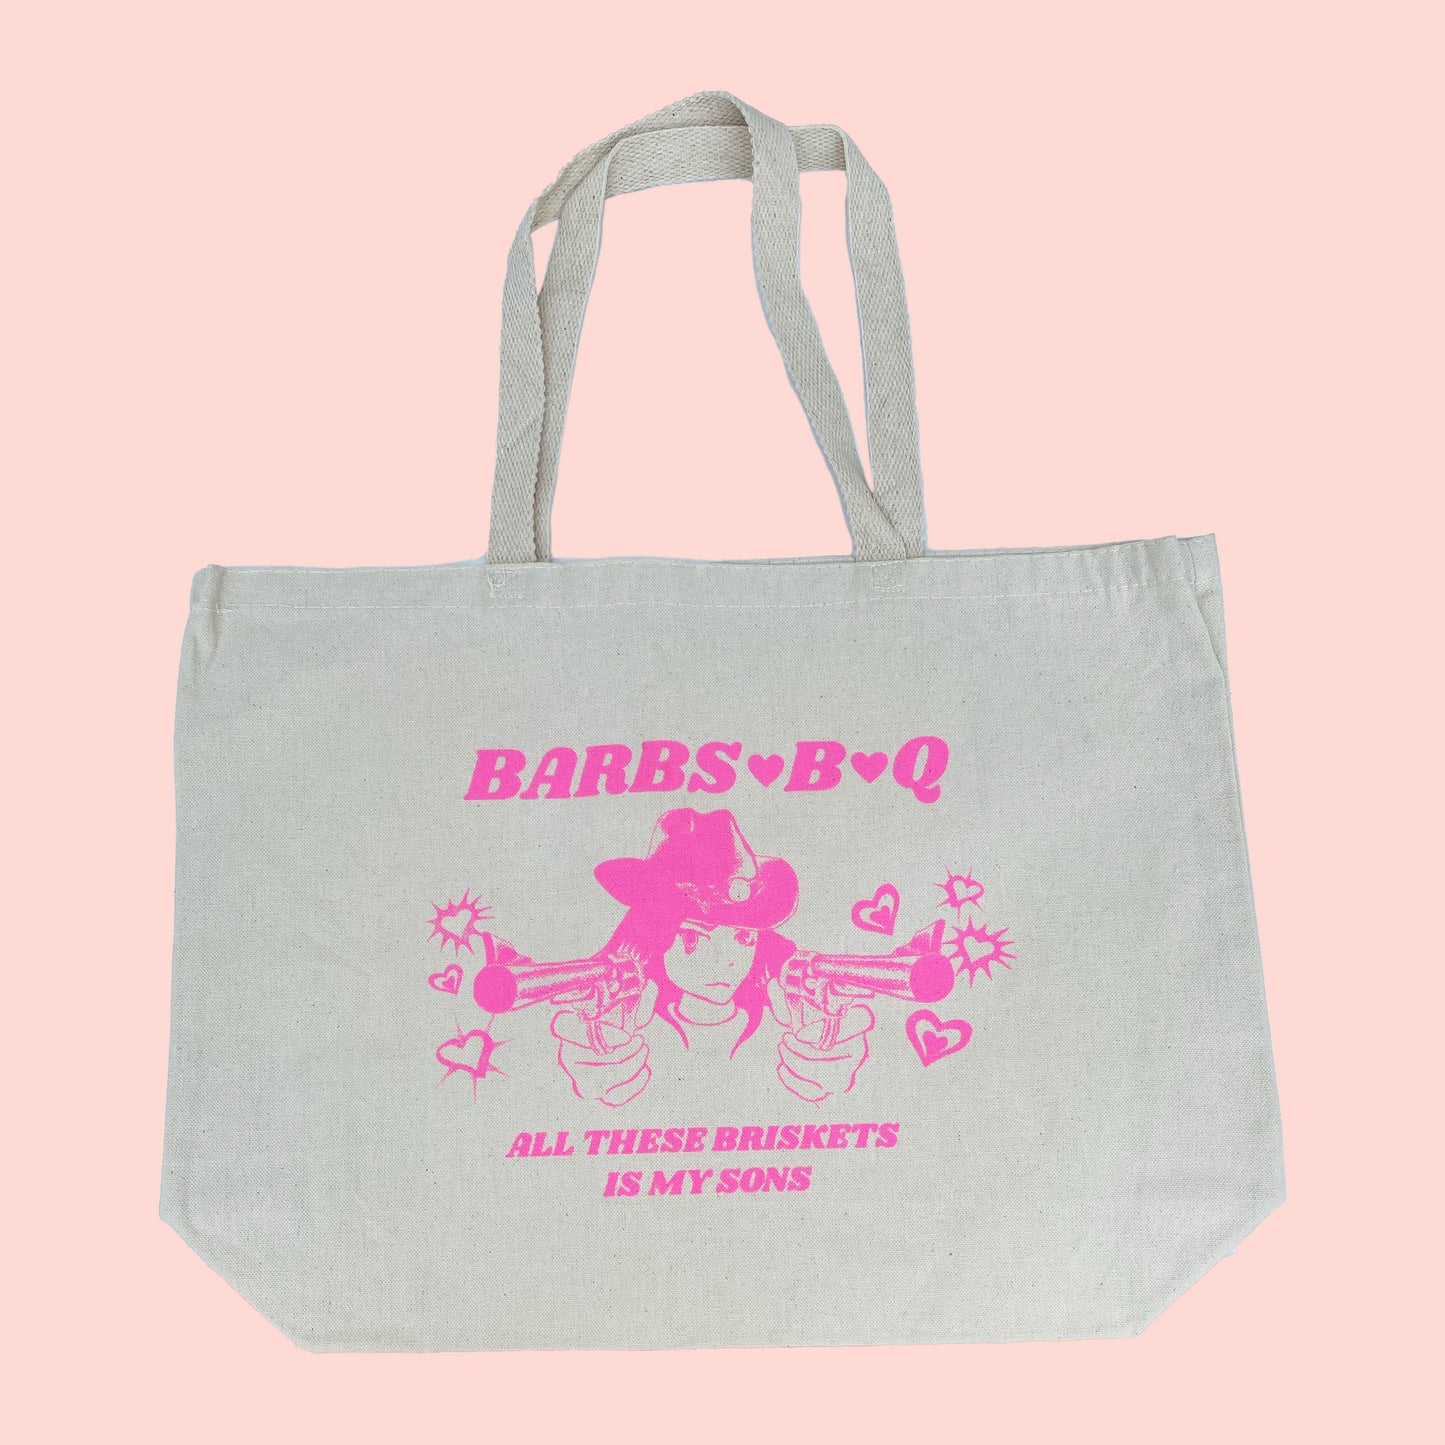 OFFICIAL "ALL THESE BRISKETS IS MY SONS" TOTE BAG